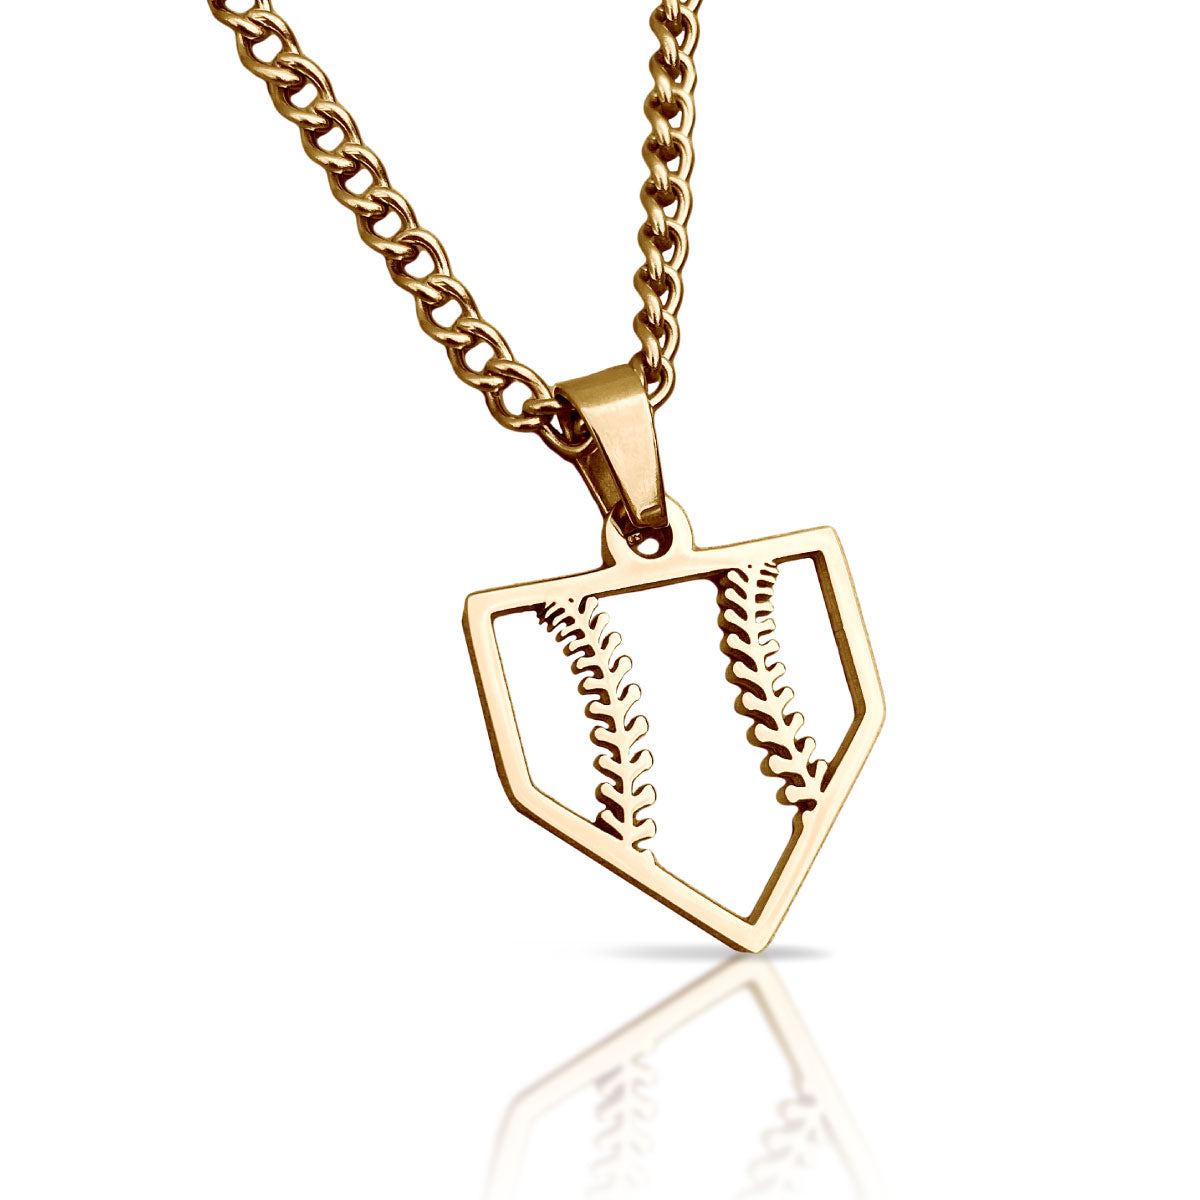 Home Plate Pendant With Chain Necklace - 14K Gold Plated Stainless Steel